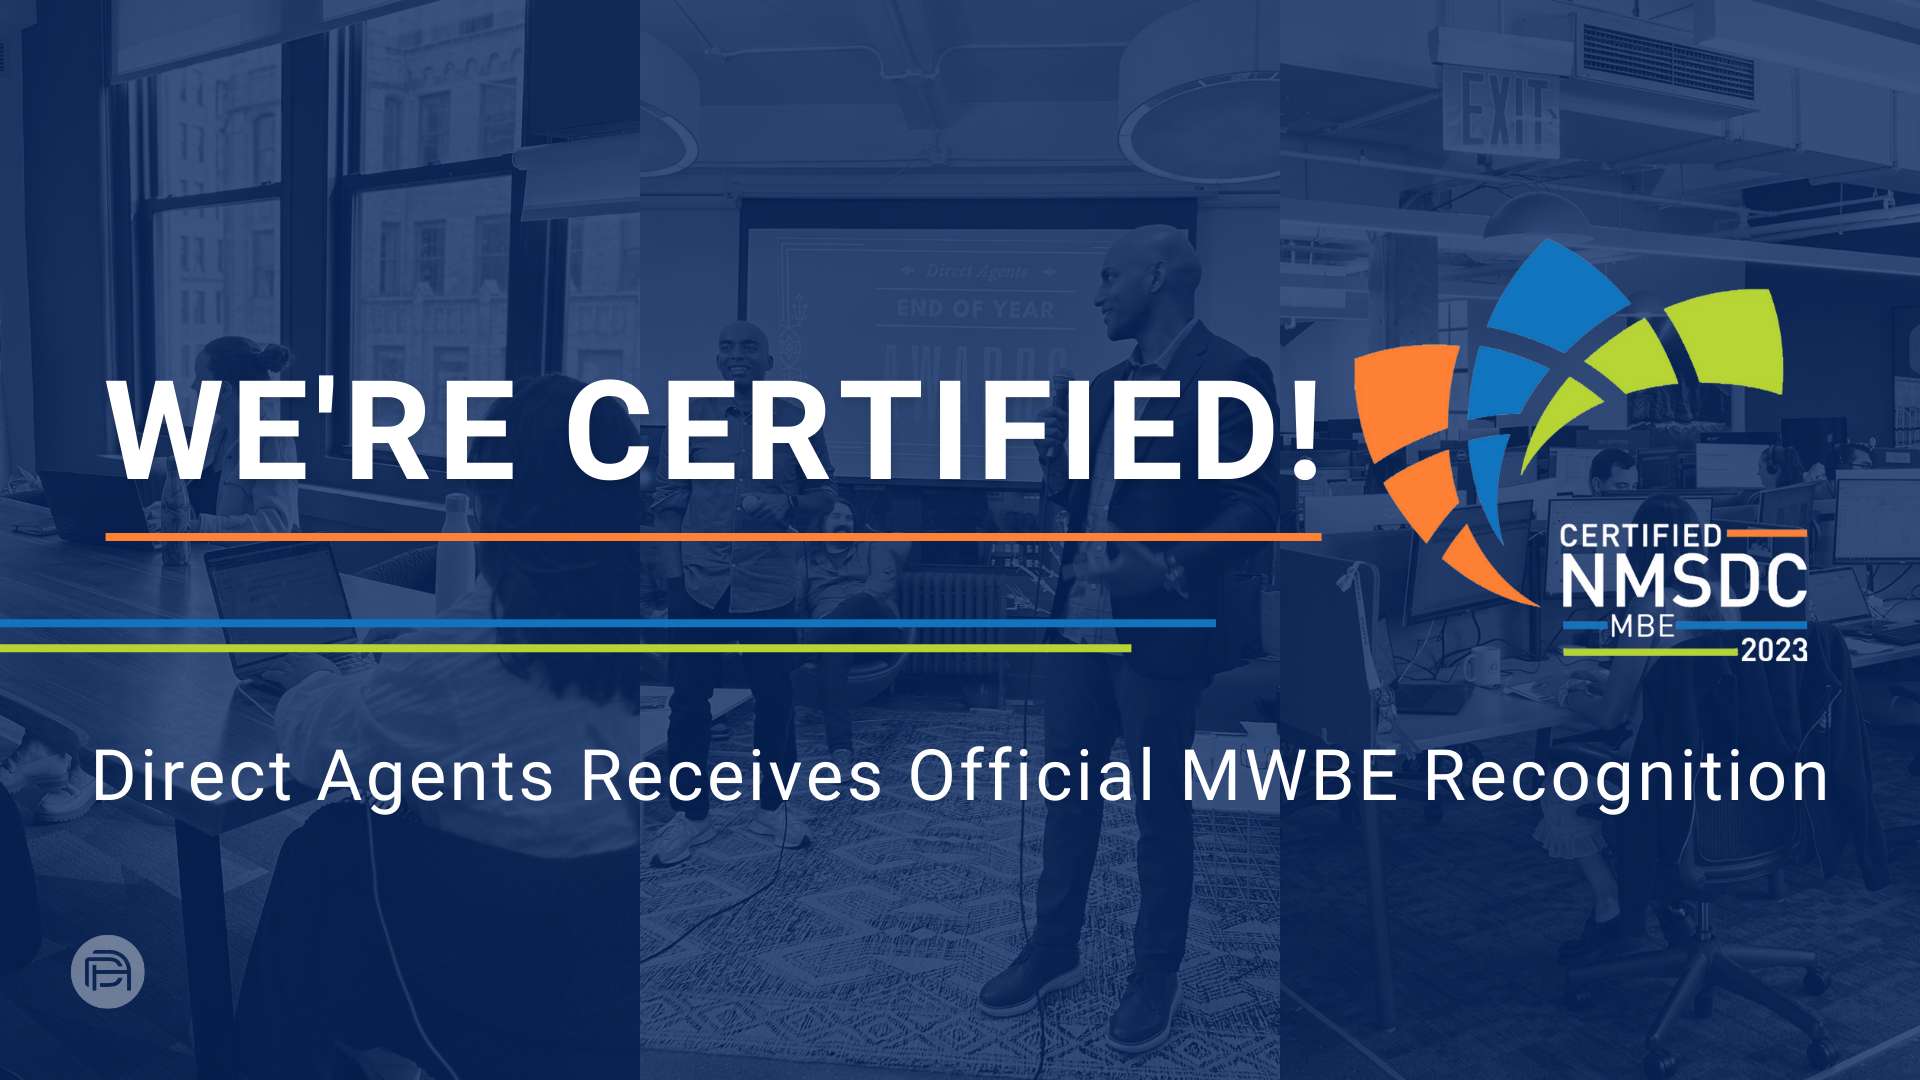 We’re Certified! Direct Agents Receives Official MWBE Recognition